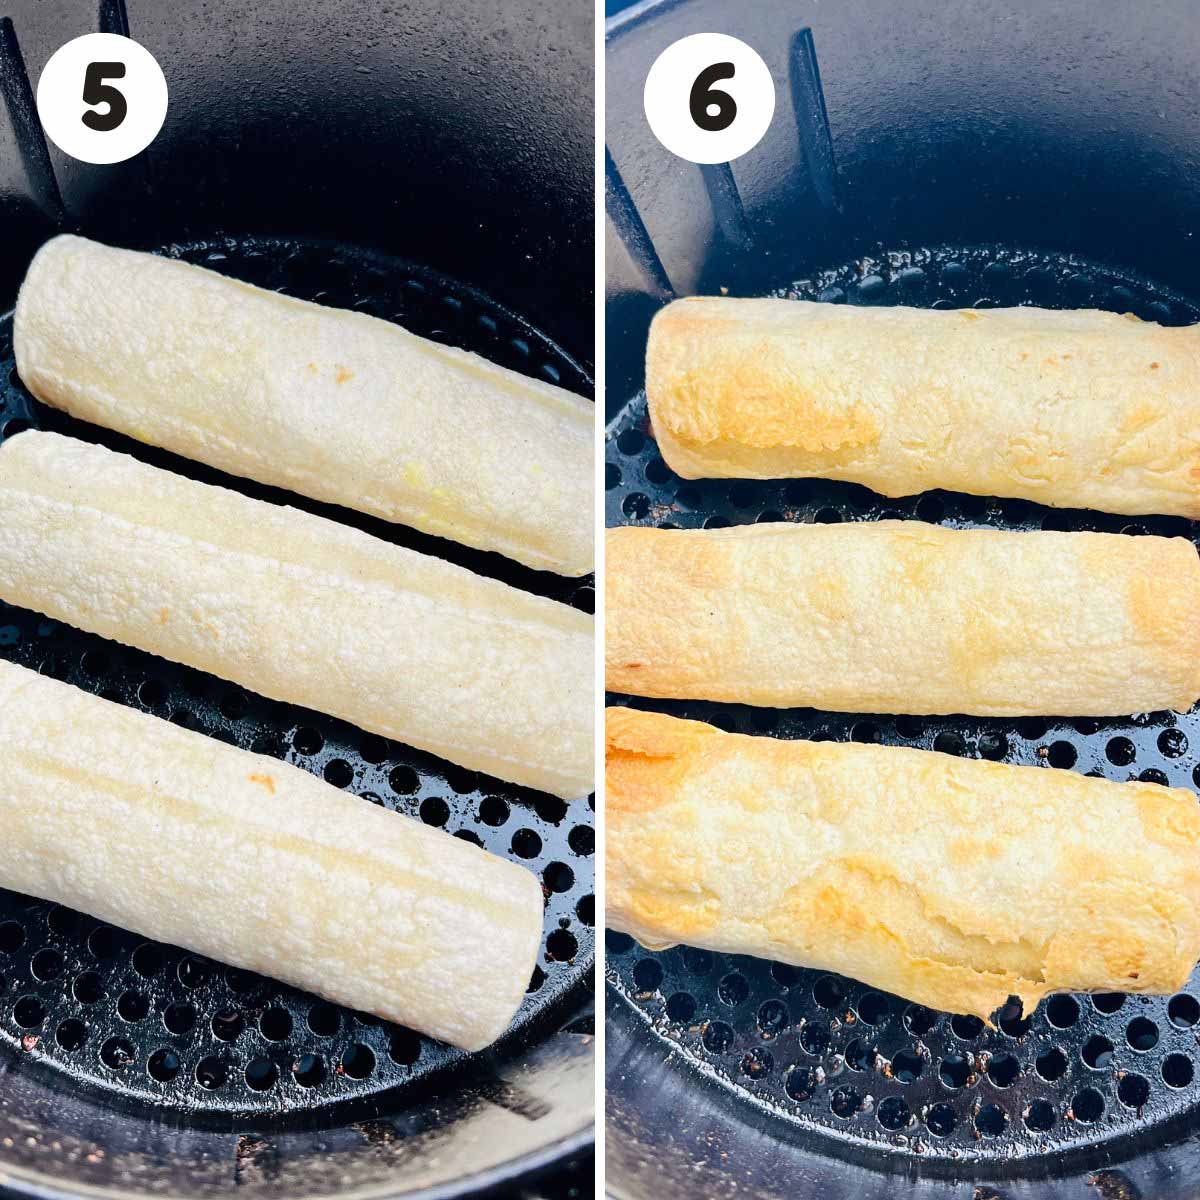 Steps to air fry the taquitos.